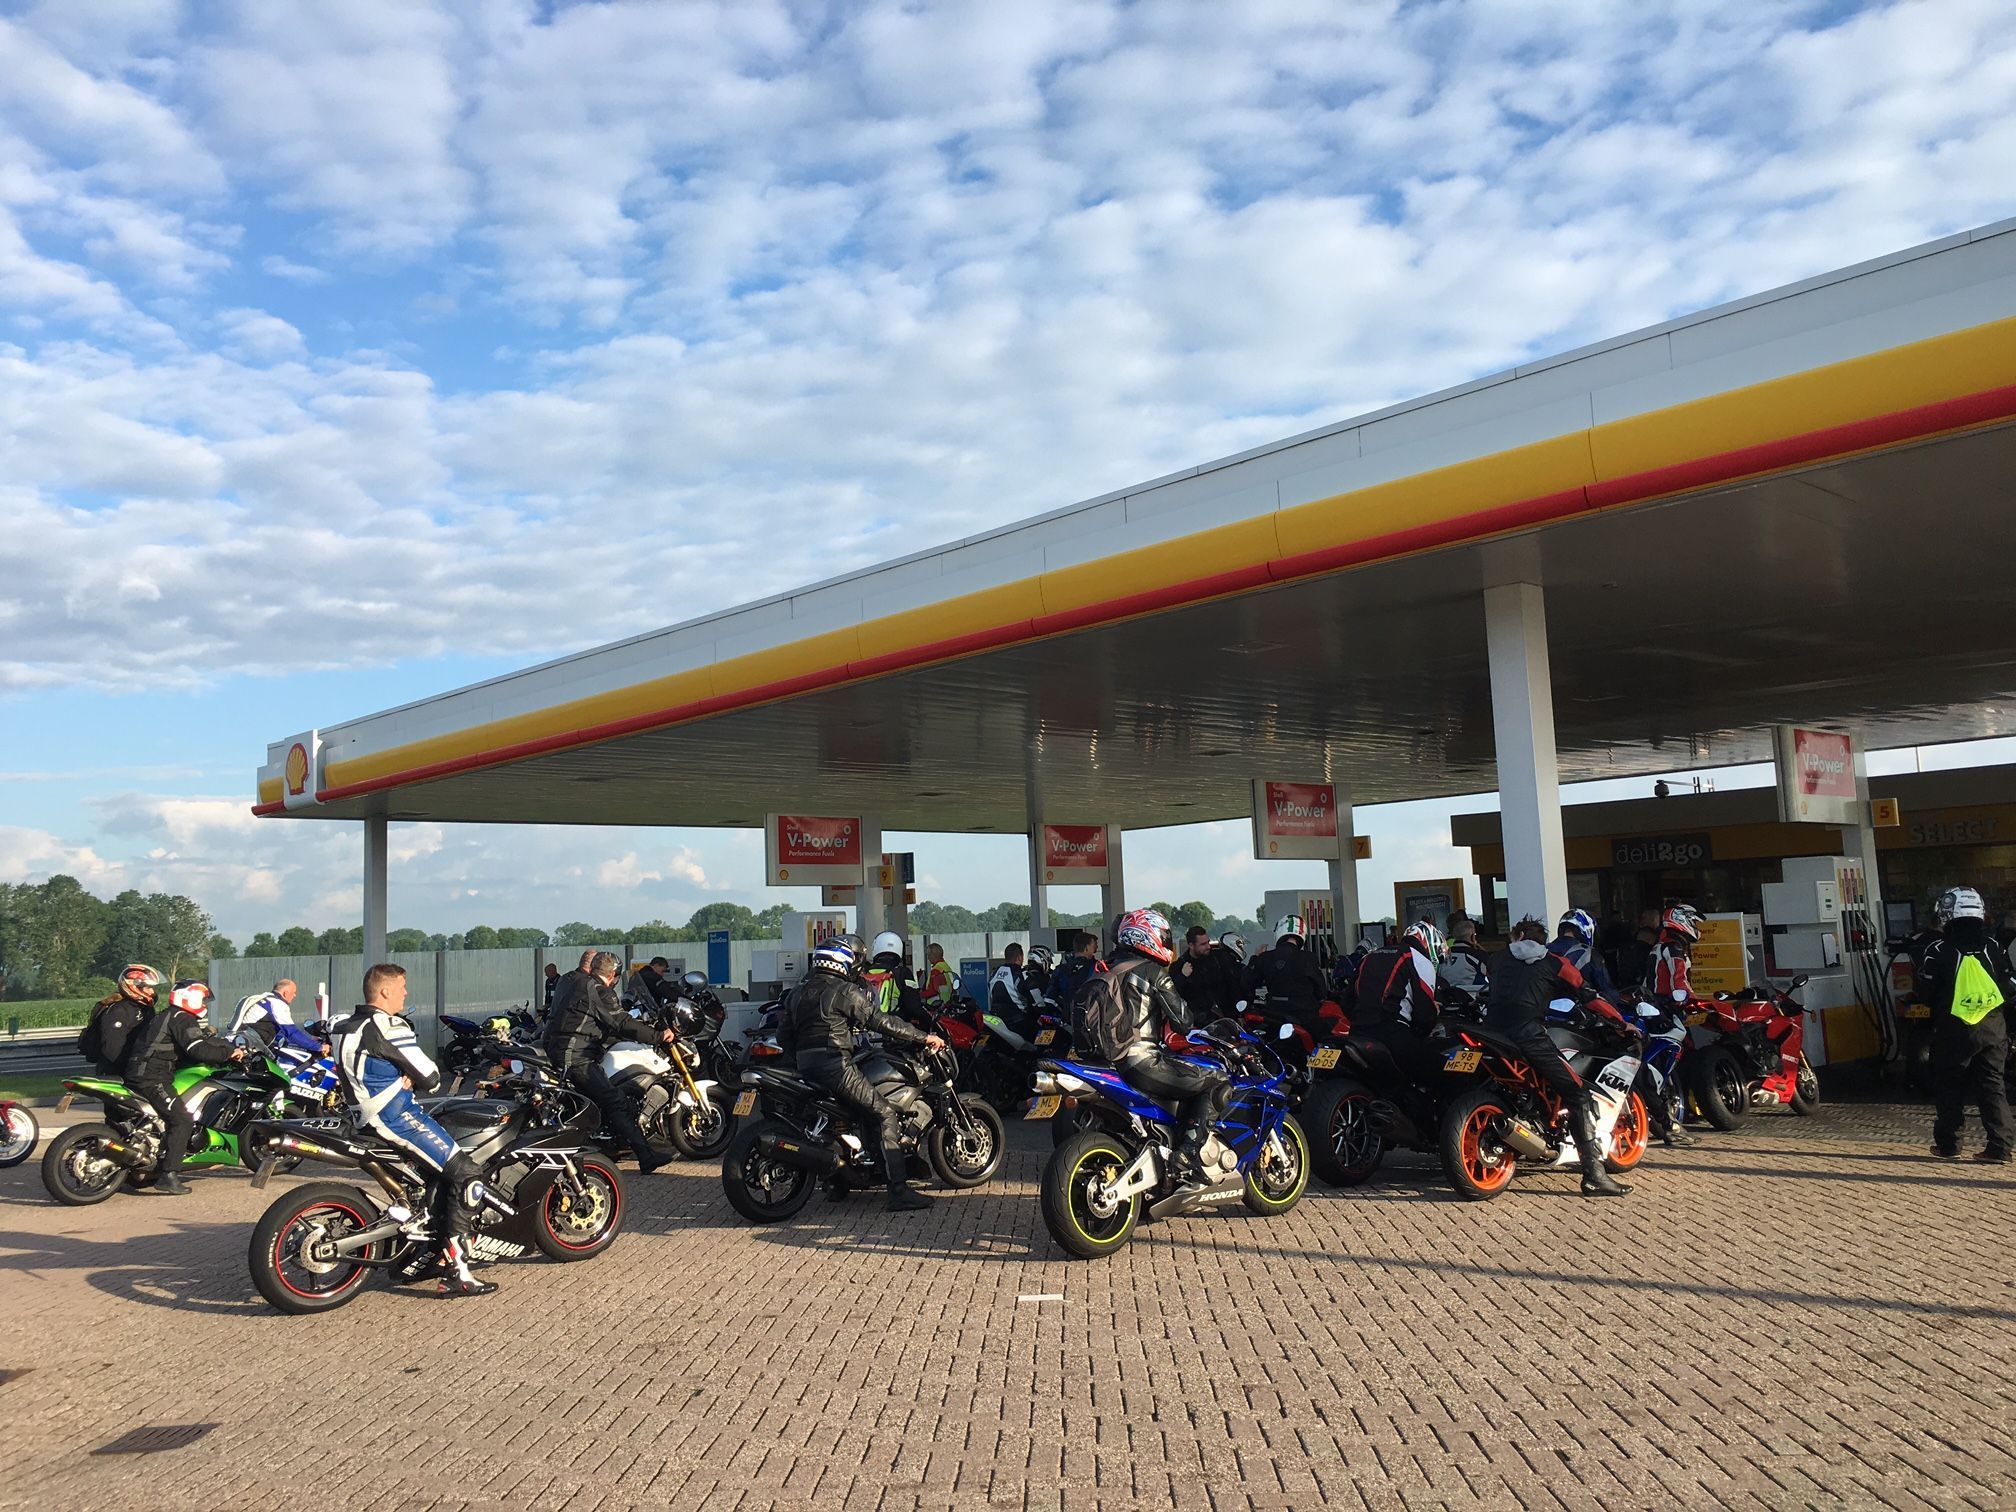 Fueling up on the way to the Dutch MotoGP in Assen.